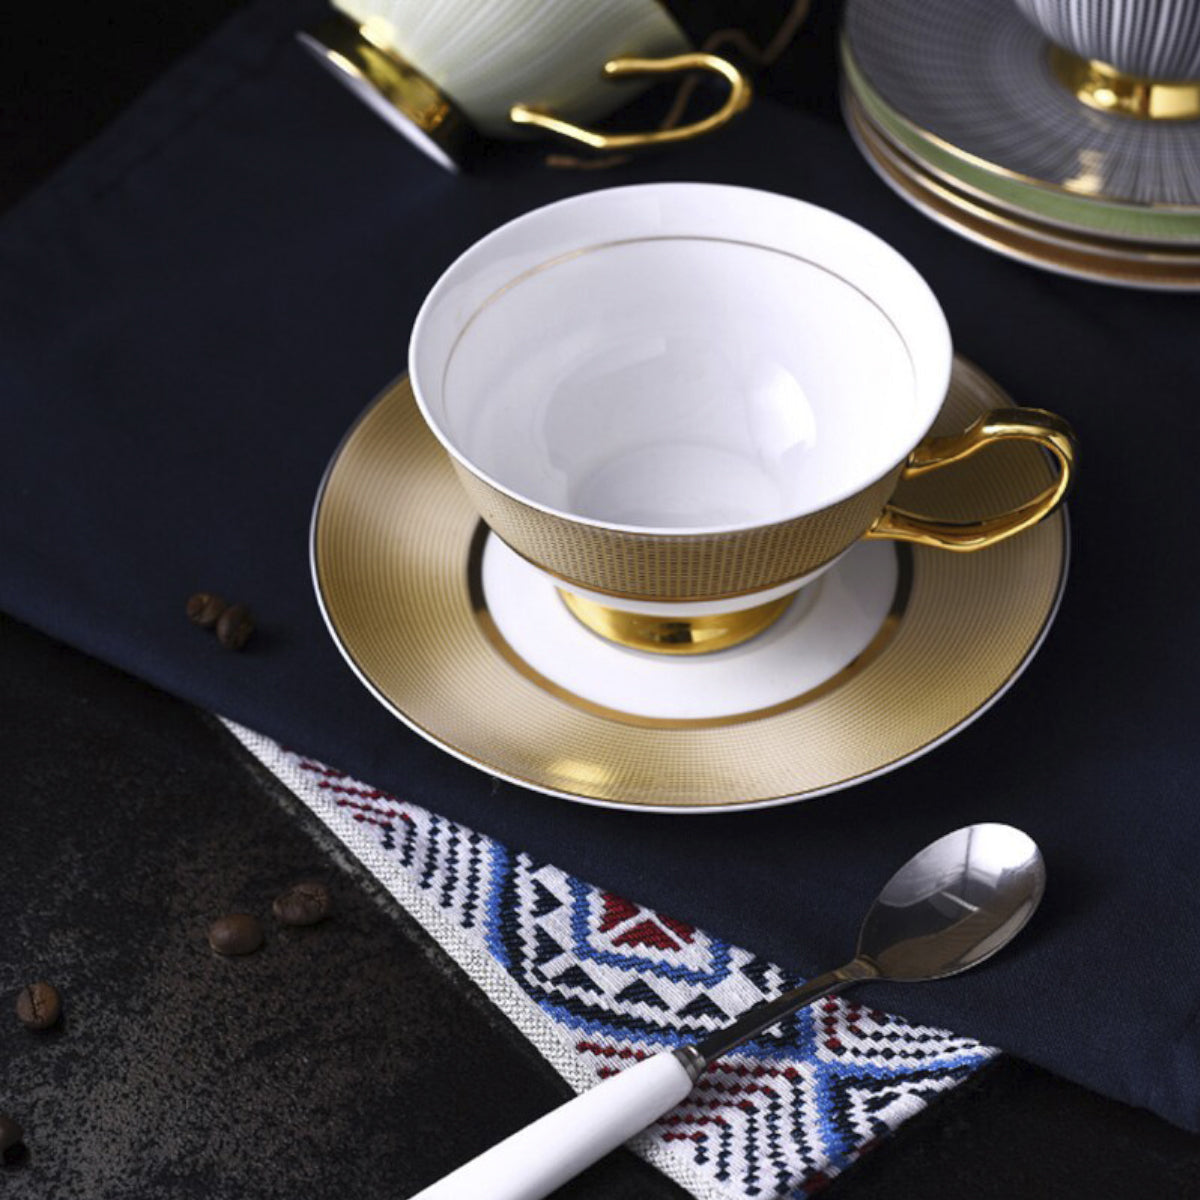 Classic British Tea Cup With Spoon